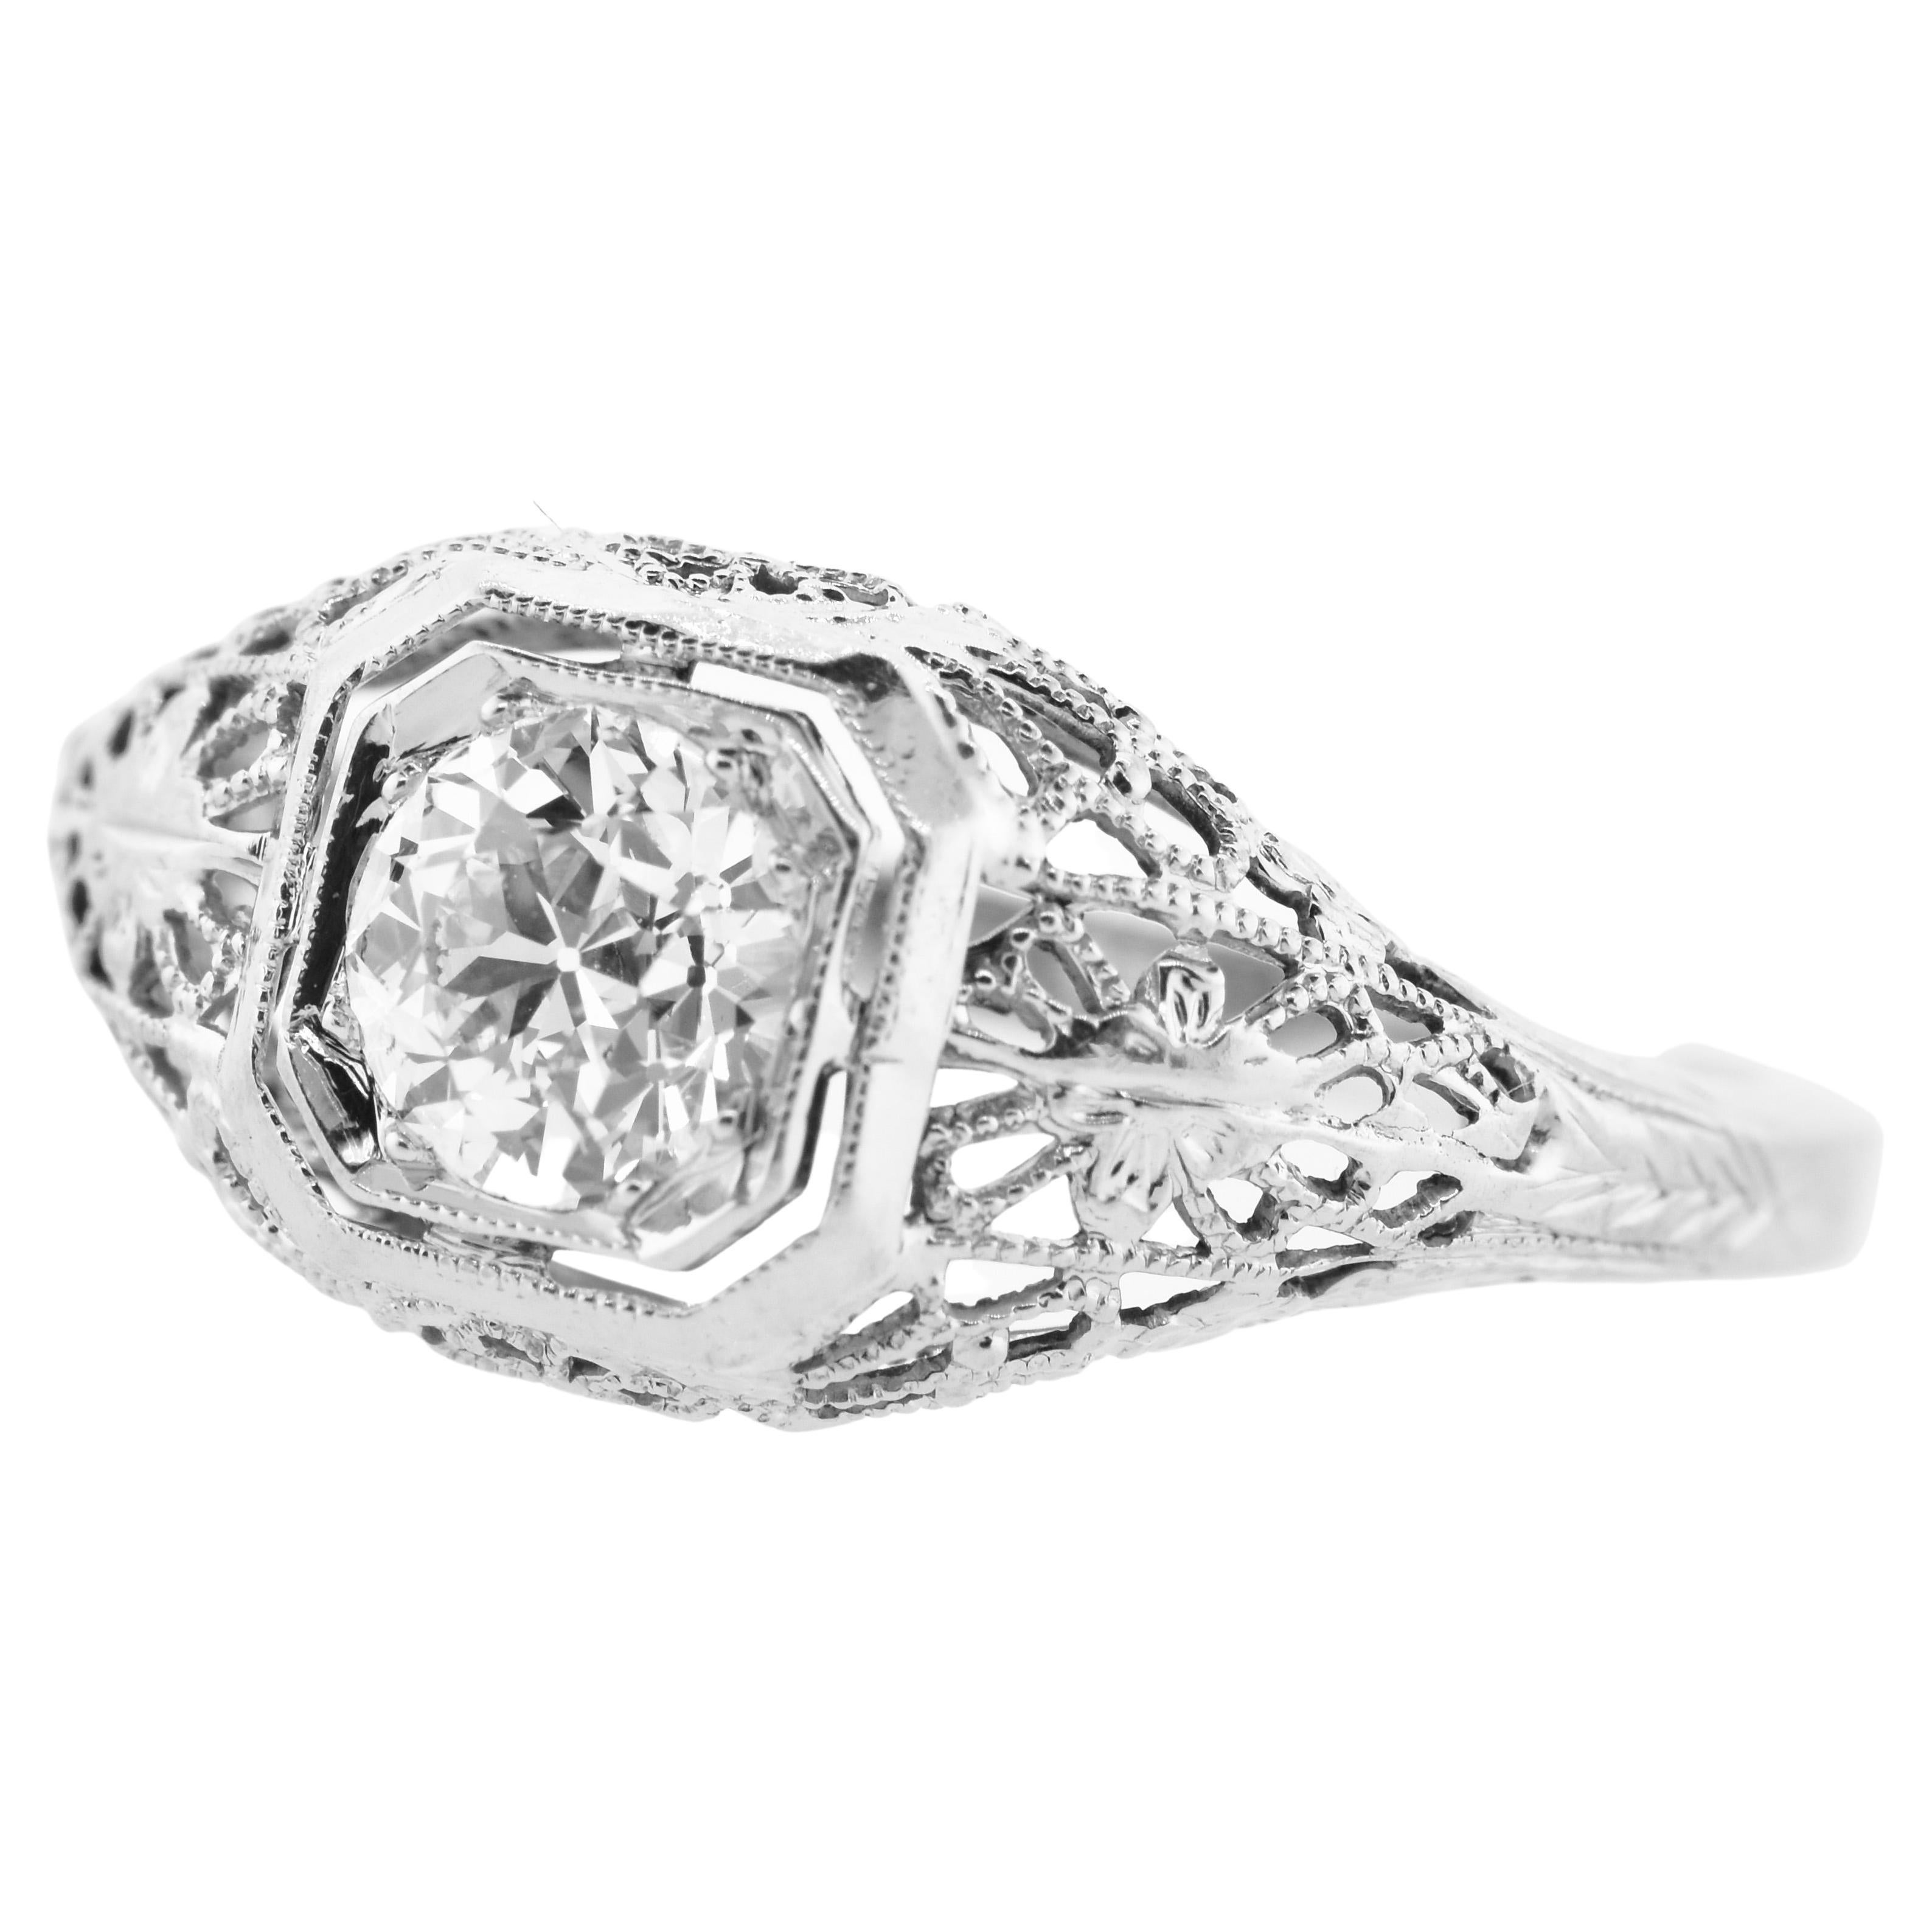 Antique Filigree Fine .65 Ct. Diamond and 18K White Gold Ring, American, c. 1920 For Sale